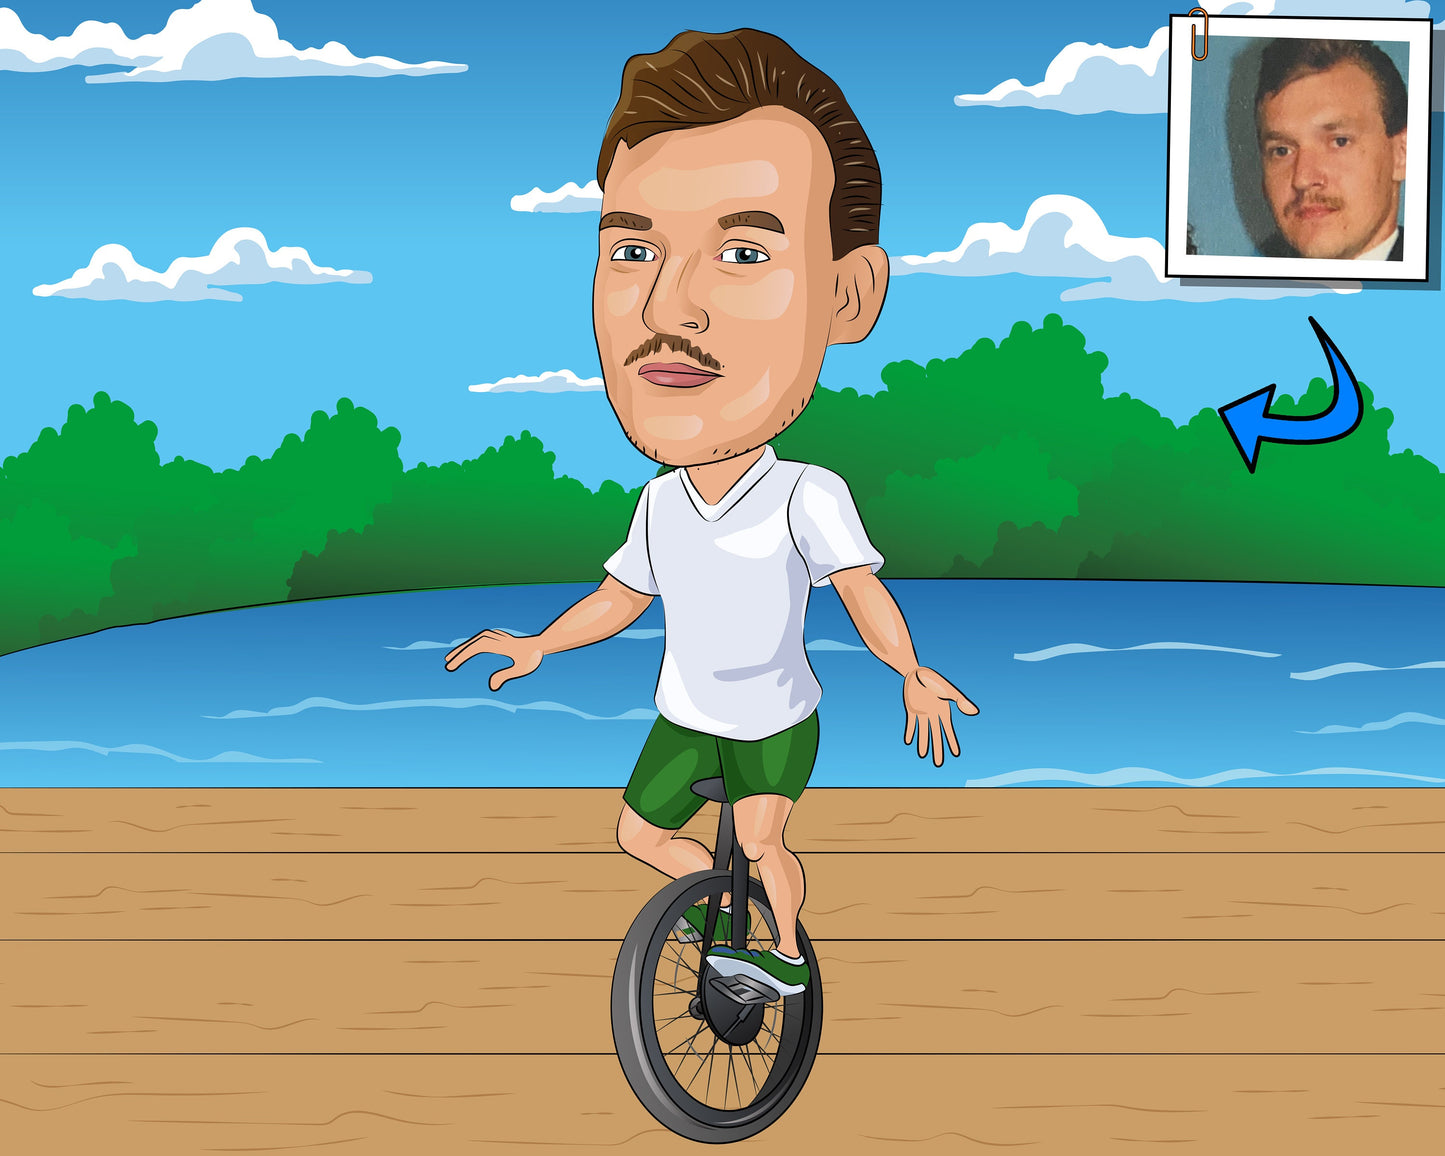 Unicyclist Gift - Custom Caricature Portrait From Your Photo/unicycle/monocycle